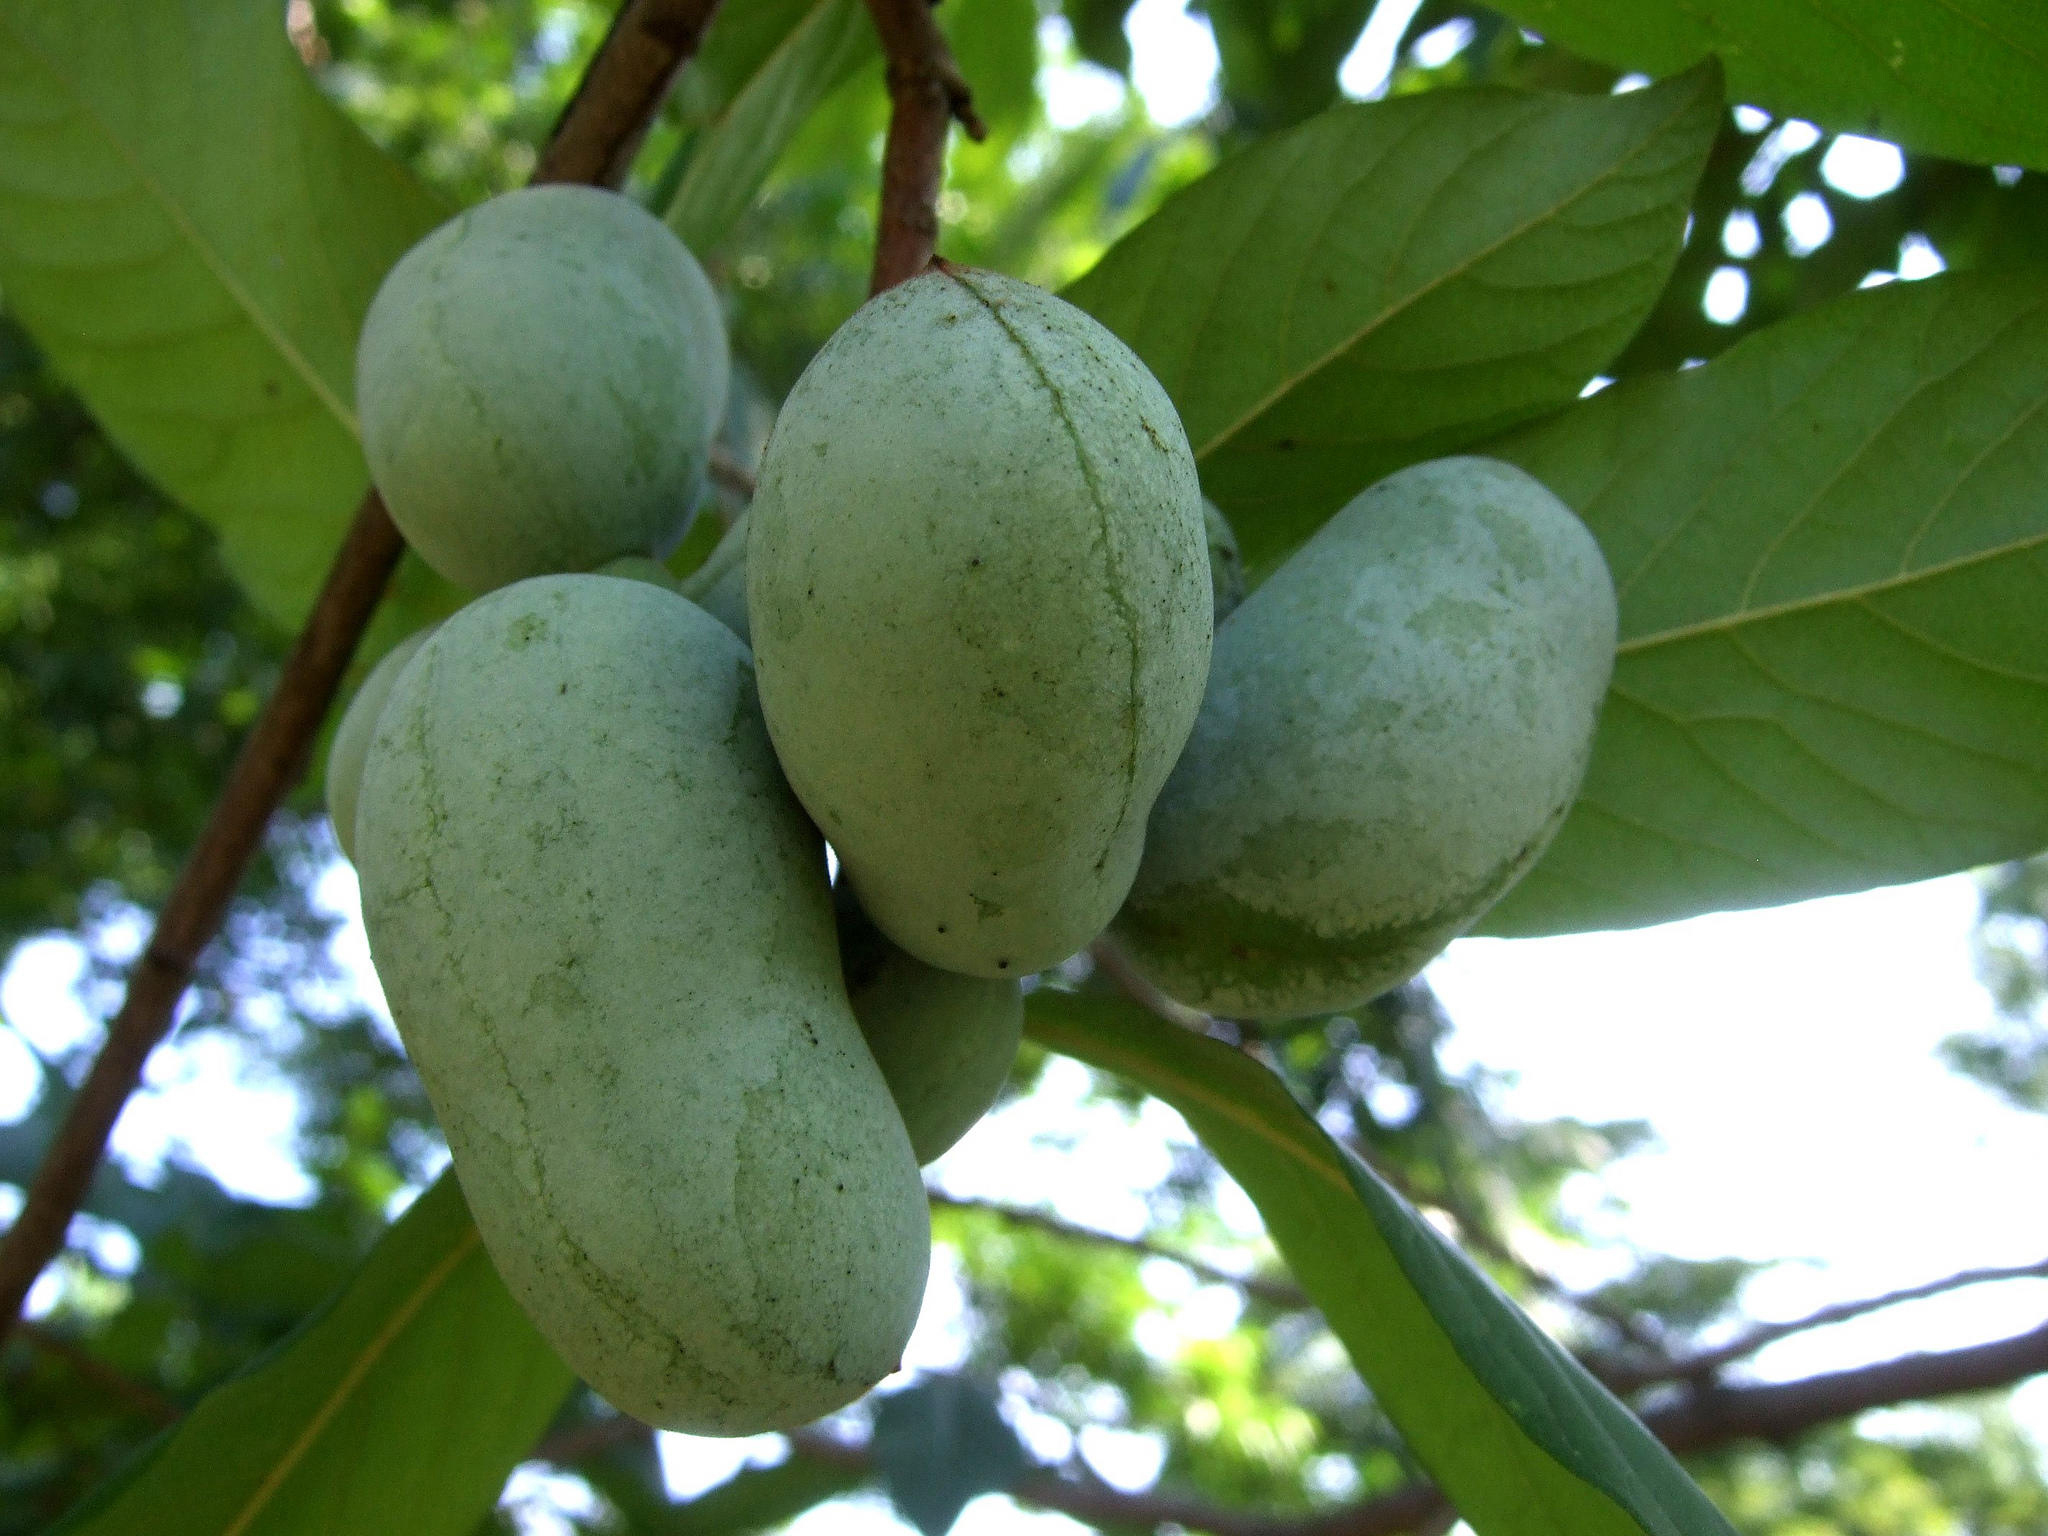 This pawpaw, Asimina triloba, is winter-hardy to Zone 5 and has fruits that ripen in fall and taste somewhat like a banana or cantaloupe custard. (Photo coutesy Wendell Smith)